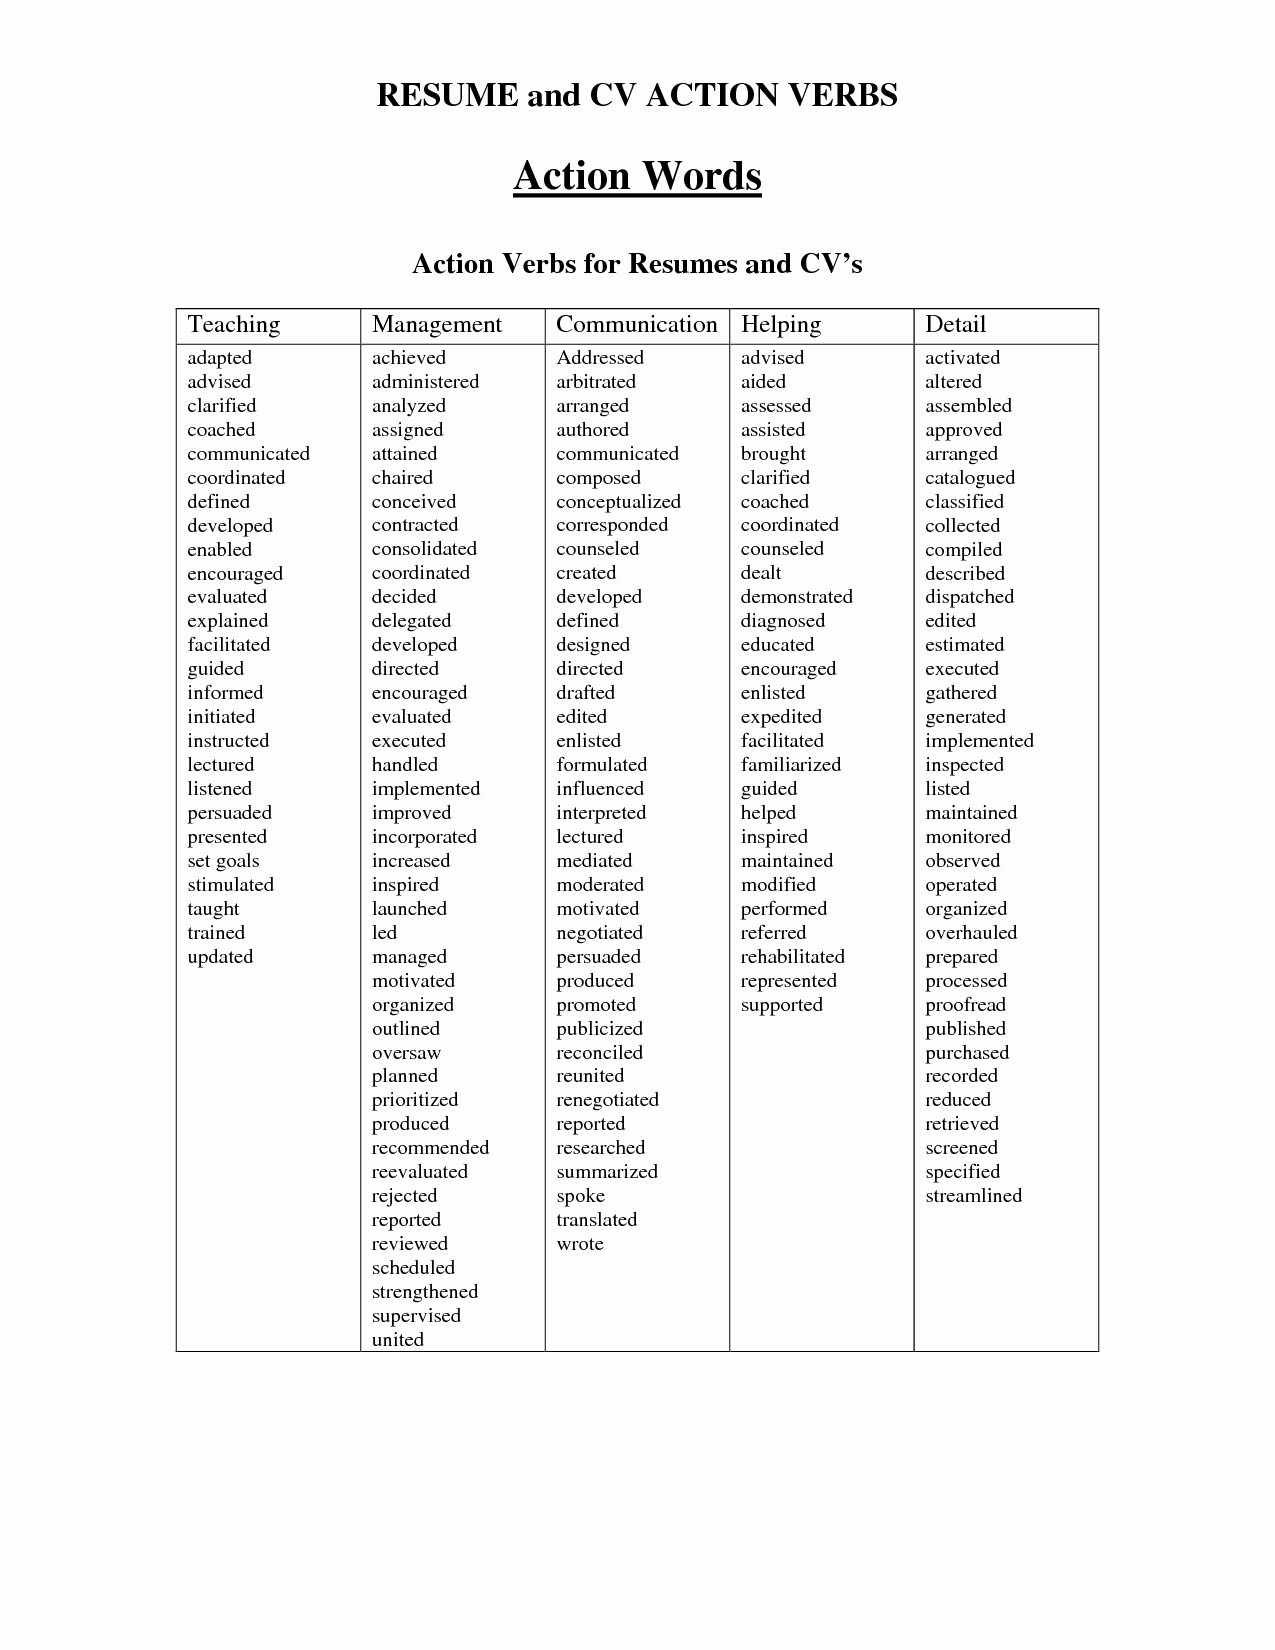 Resume Action Words  Resume Action Verbs For Sales 240 Resume Action Words Power